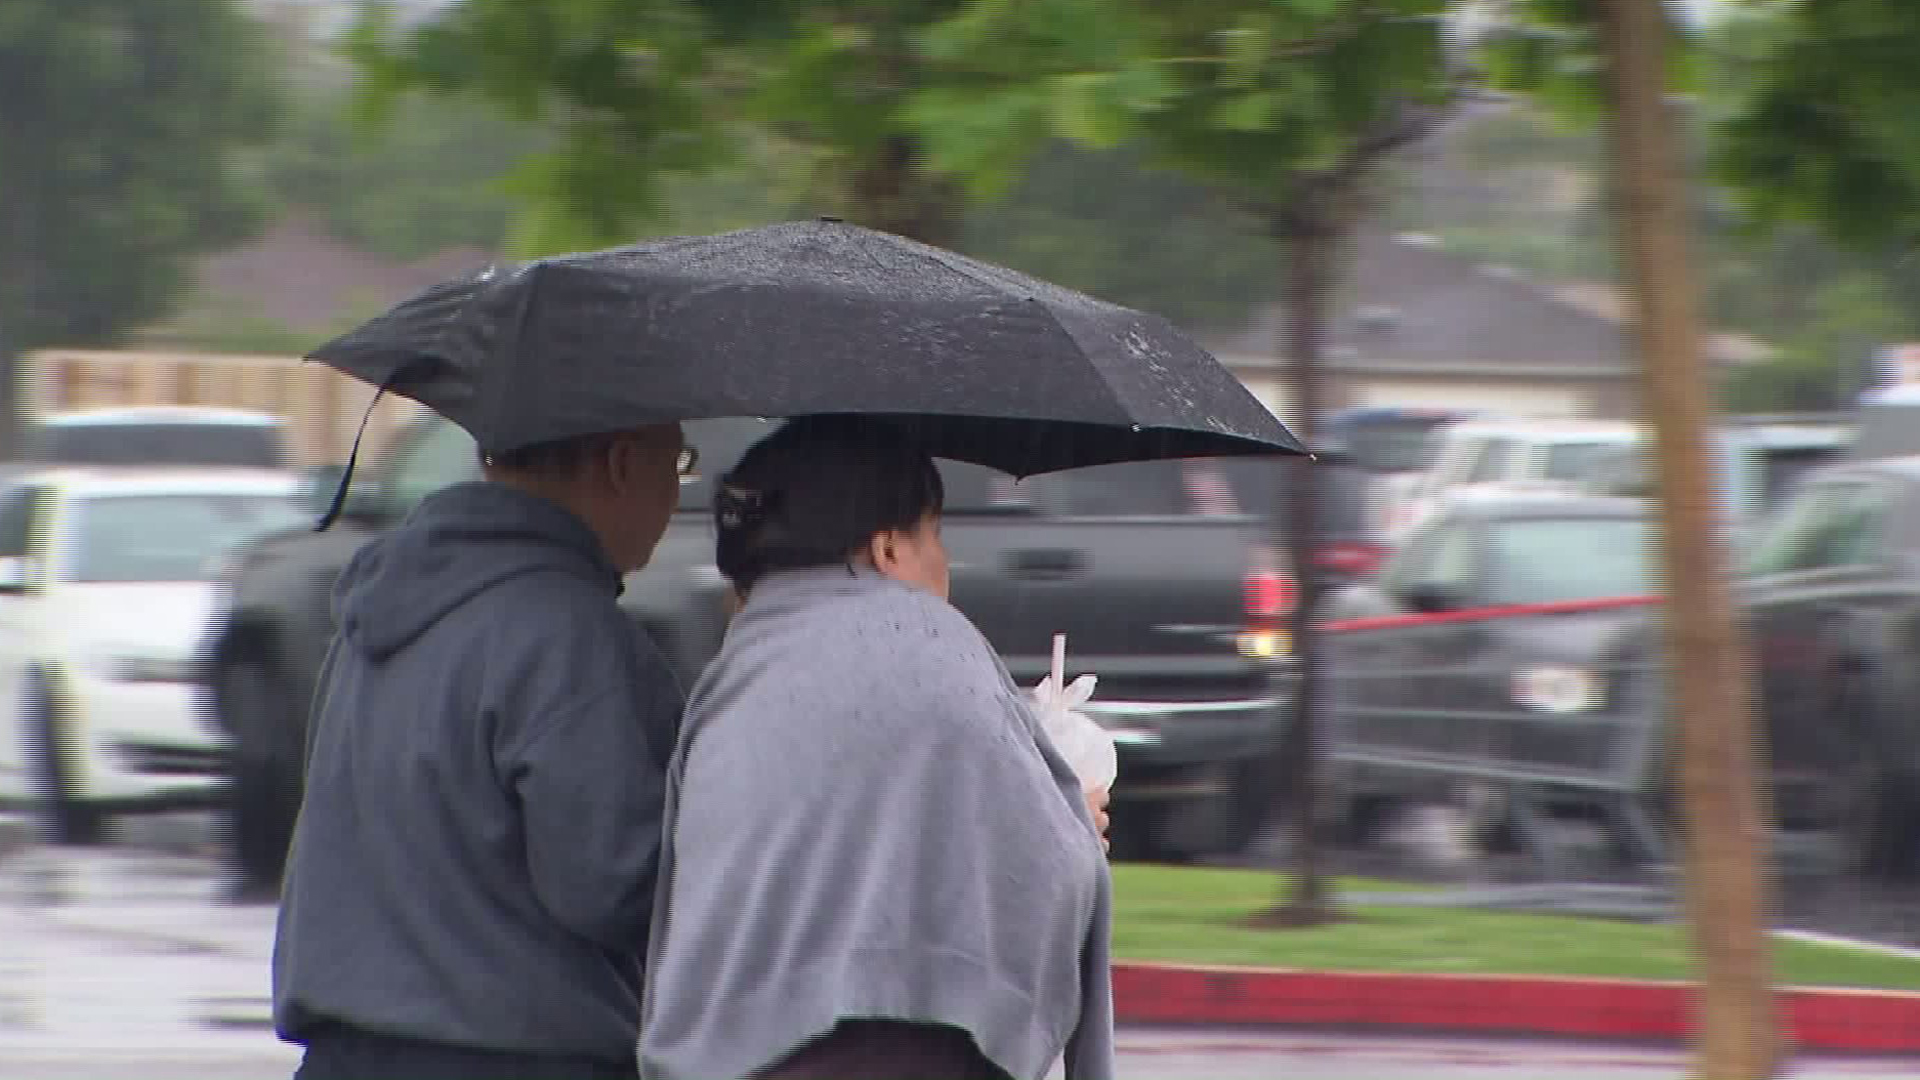 A couple walks under an umbrella during a rain storm in Fullerton in this file image.